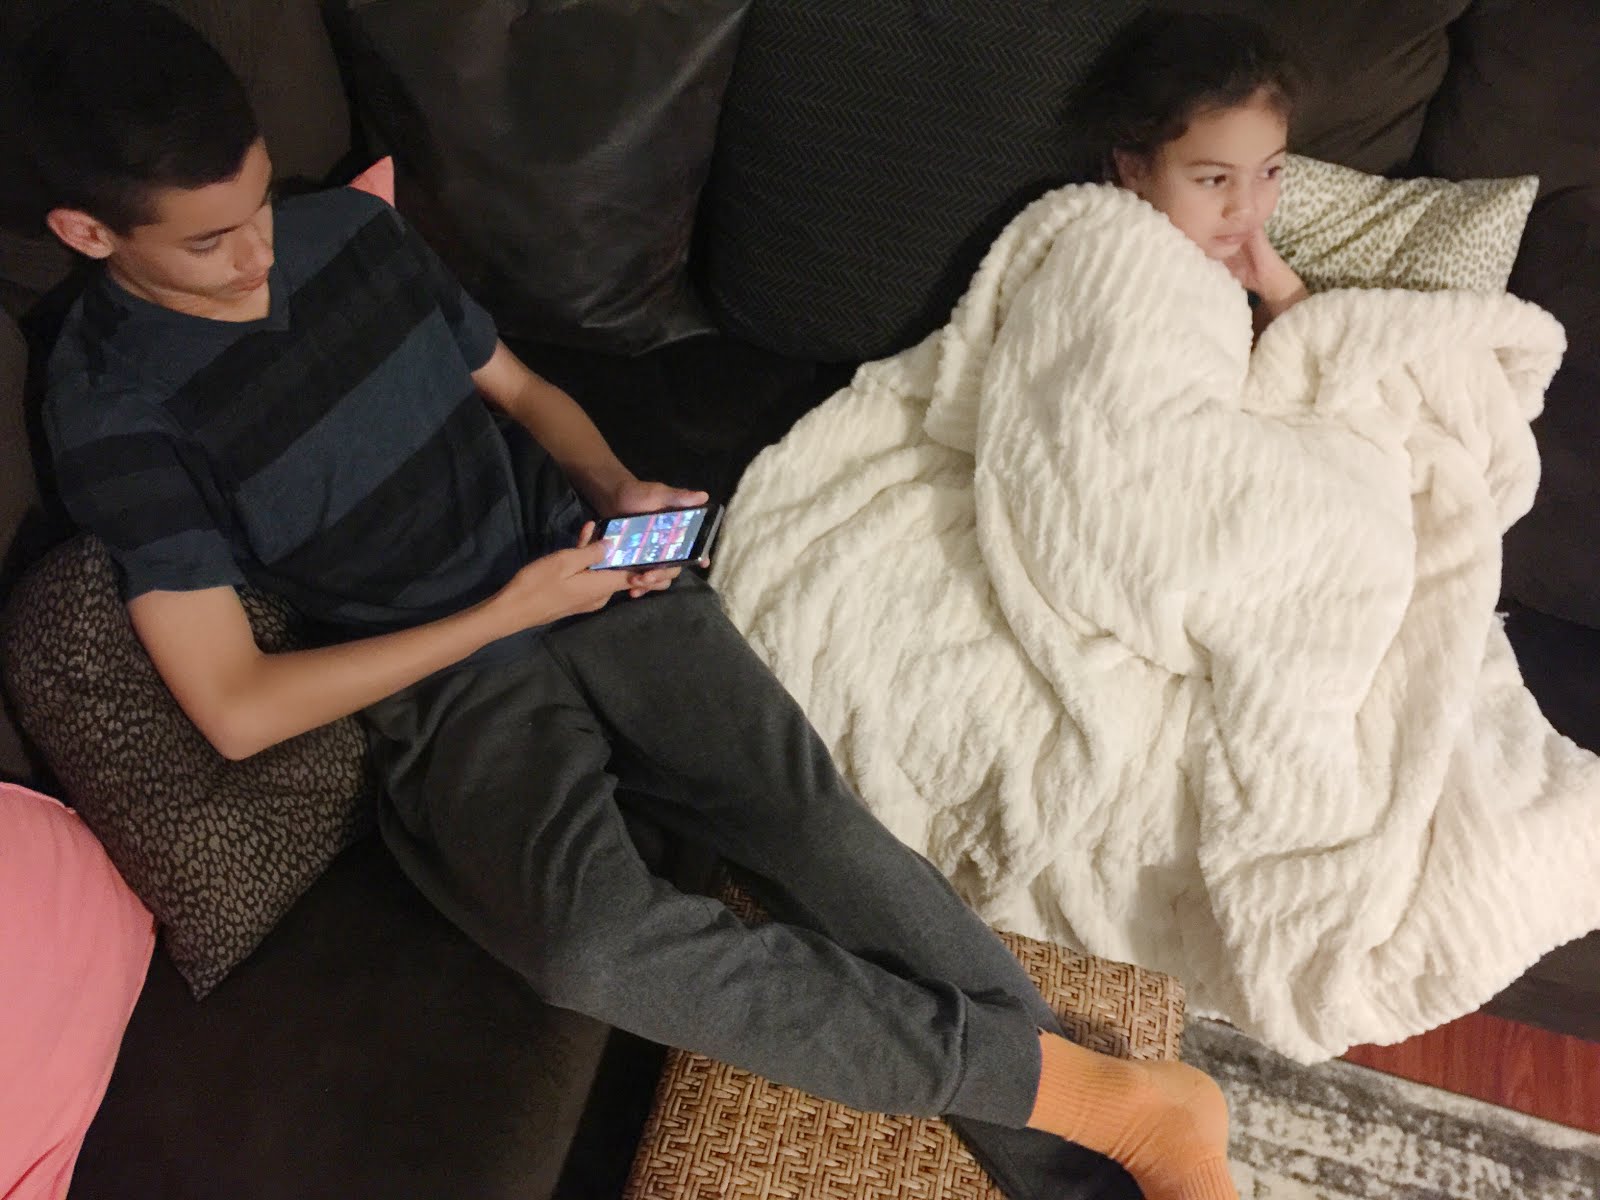 How to have a family campout indoors to watch movies on VUDU. Max Your Tax Cash with Walmart Family Mobile Plus. #YourTaxCash #ad